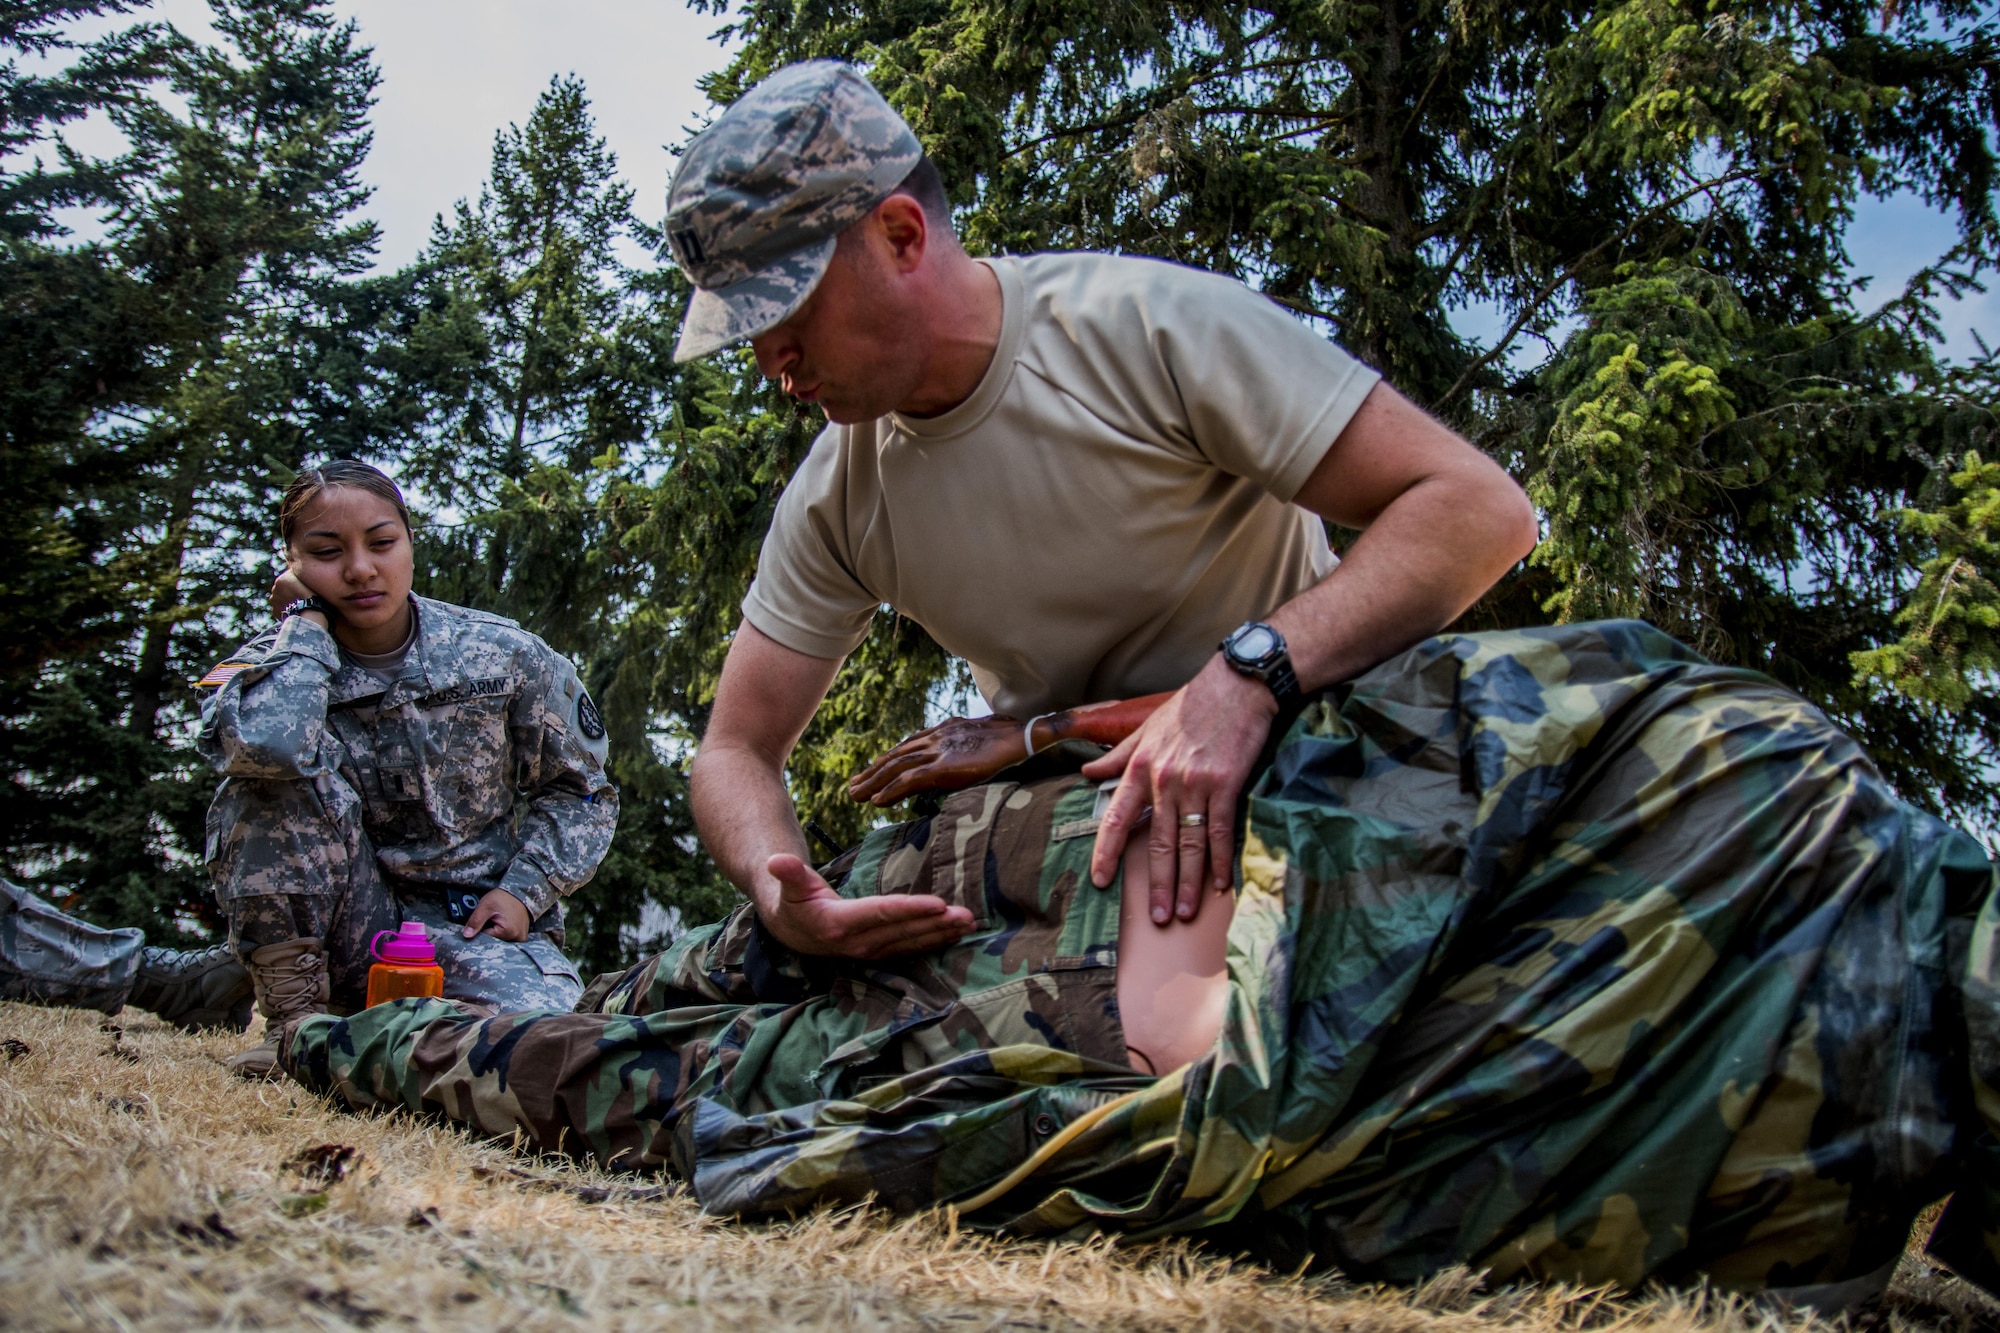 Captain Ryan Garabrandt, 446th Aeromedical Staging Squadron nurse, checks for spinal injuries on a training manikin in preparation for the annual Expert Field Medical Badge test at McChord Field, Wash., Aug. 2, 2015. The Expert Field Medical Badge is a unique distinction worn only by the most battle-ready and elite medical personnel in the military. Every year at Joint Base Lewis-McChord, Wash., a  two-week intensive testing event is set up to qualify eligible service members from around the country for the right to wear the coveted badge. (U.S. Air Force photo by Senior Airman Daniel Liddicoet)